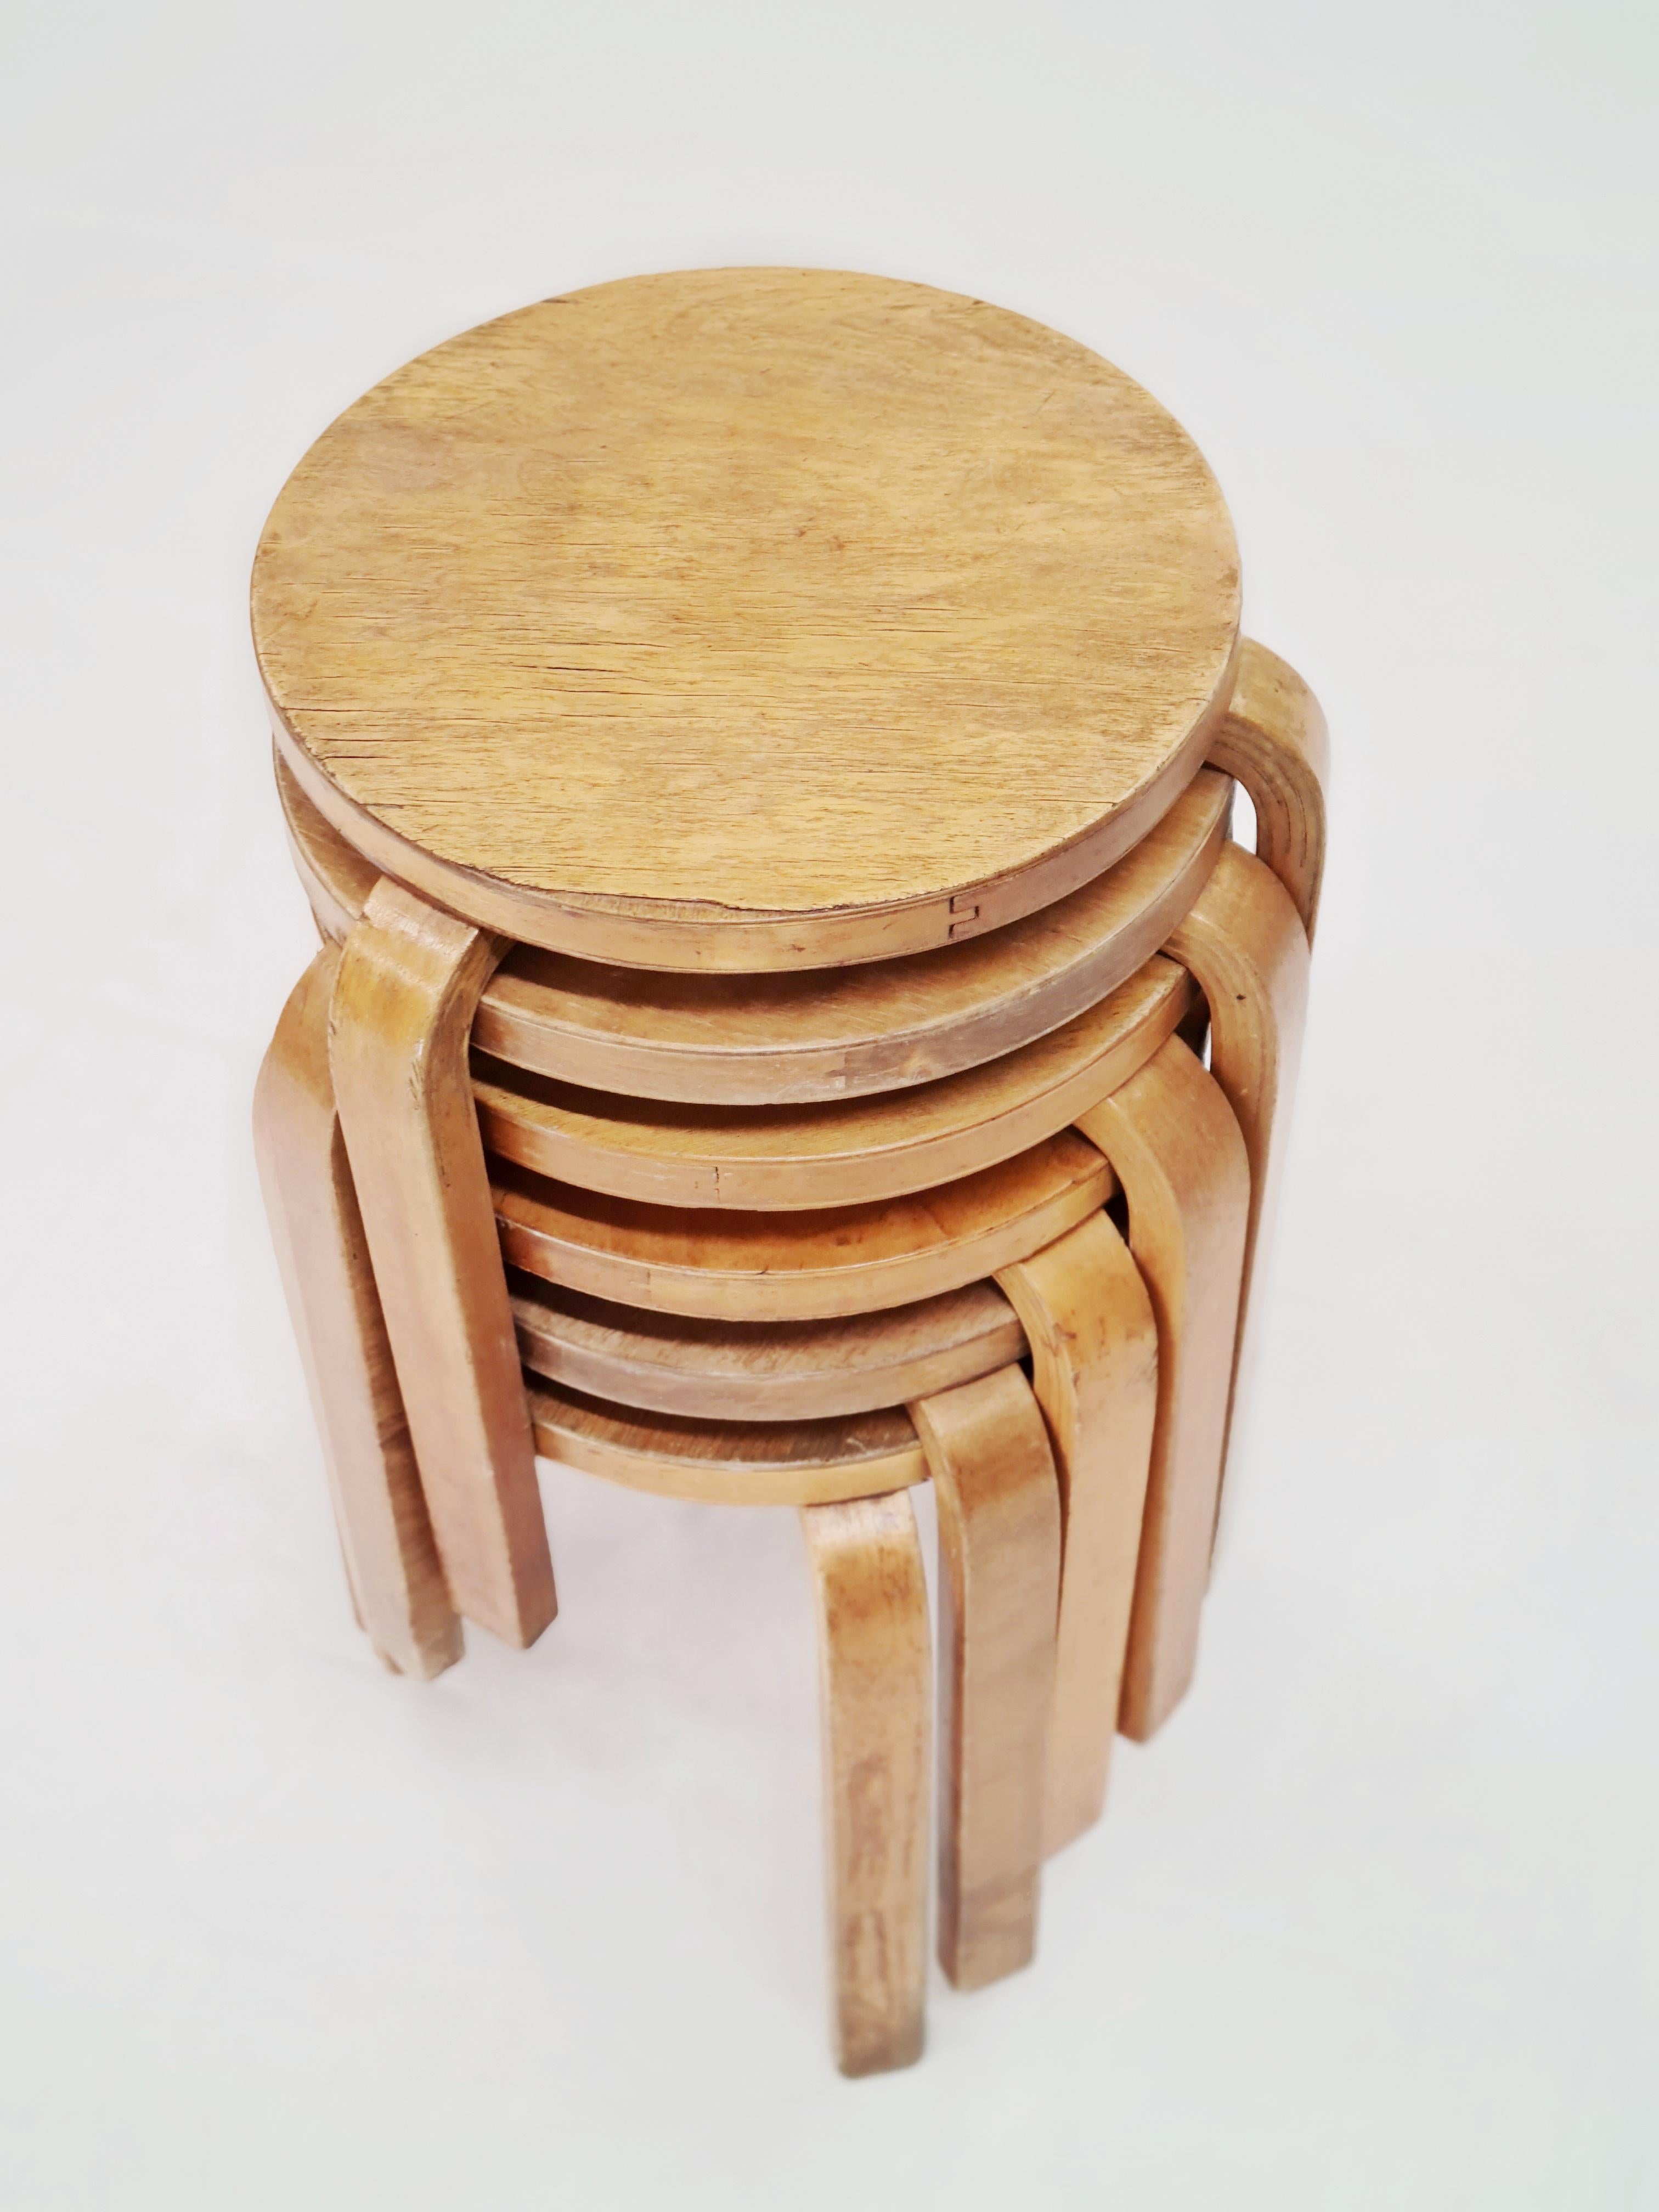 The stool 60 has become a symbol and one of the most recognizable designs by Alvar Aalto. This design shows the collaboration made between the Finnish Architect Alvar Aalto and the experienced cabinetmaker Otto Korhonen. A collaboration that